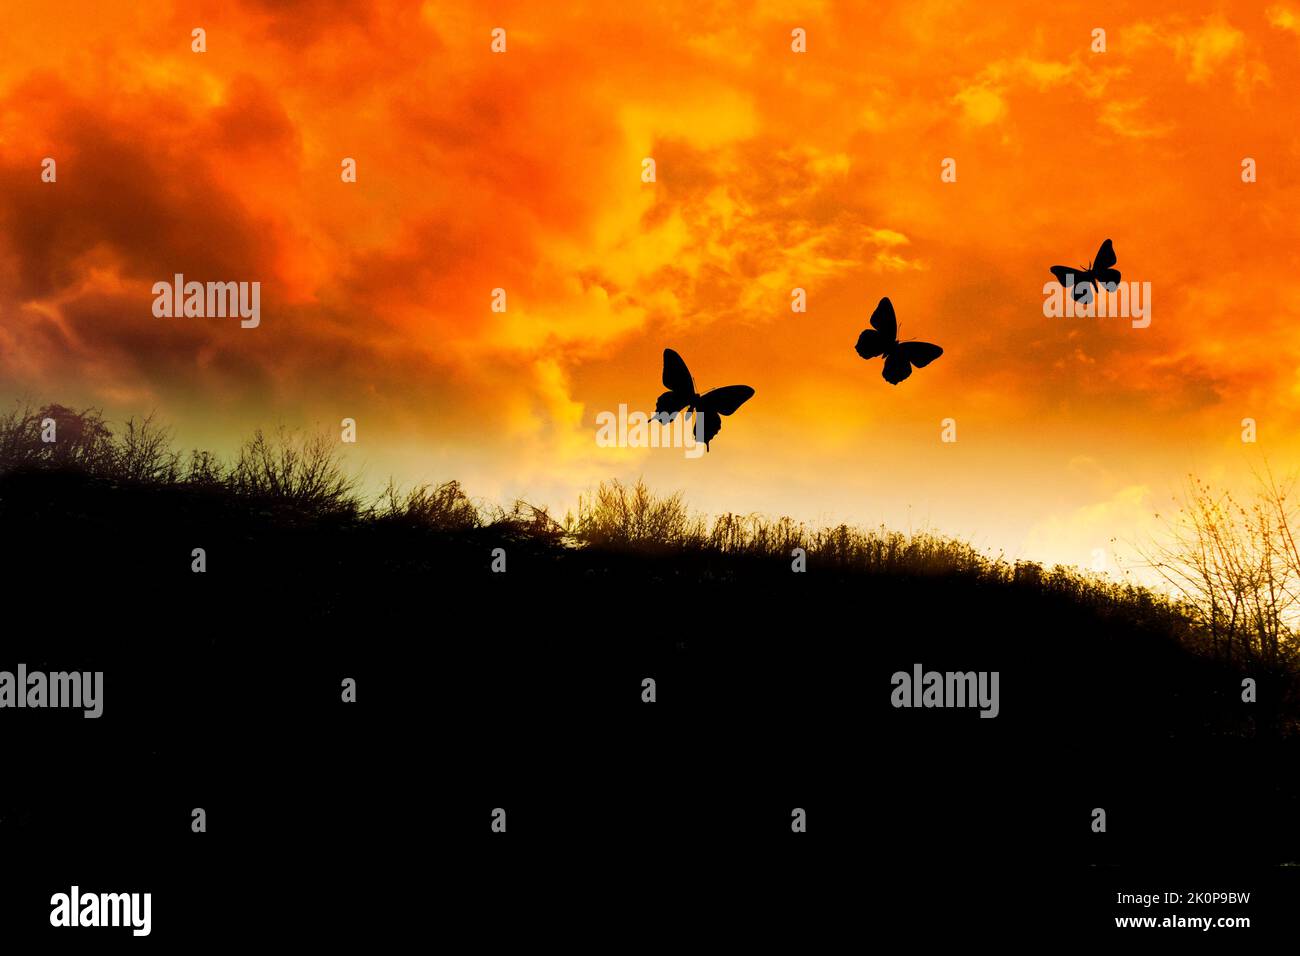 sunset over a field and three butterflies in silhouette Stock Photo